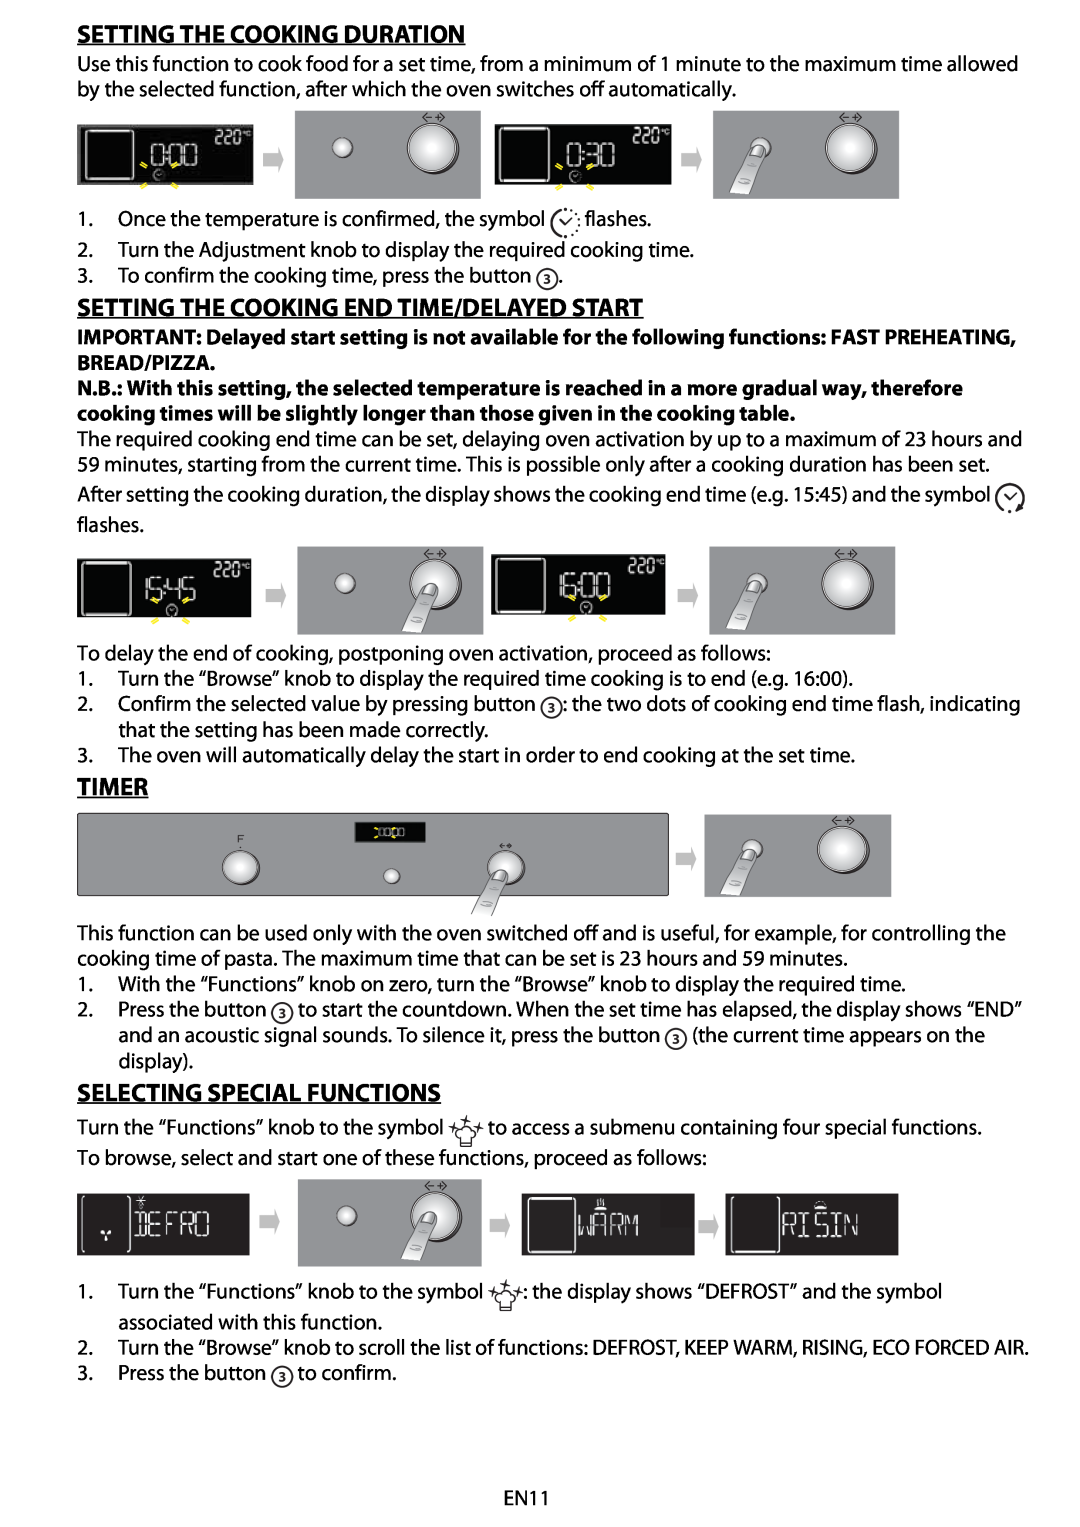 Whirlpool AKZ 561 manual Setting The Cooking Duration, Setting The Cooking End Time/Delayed Start, Timer 